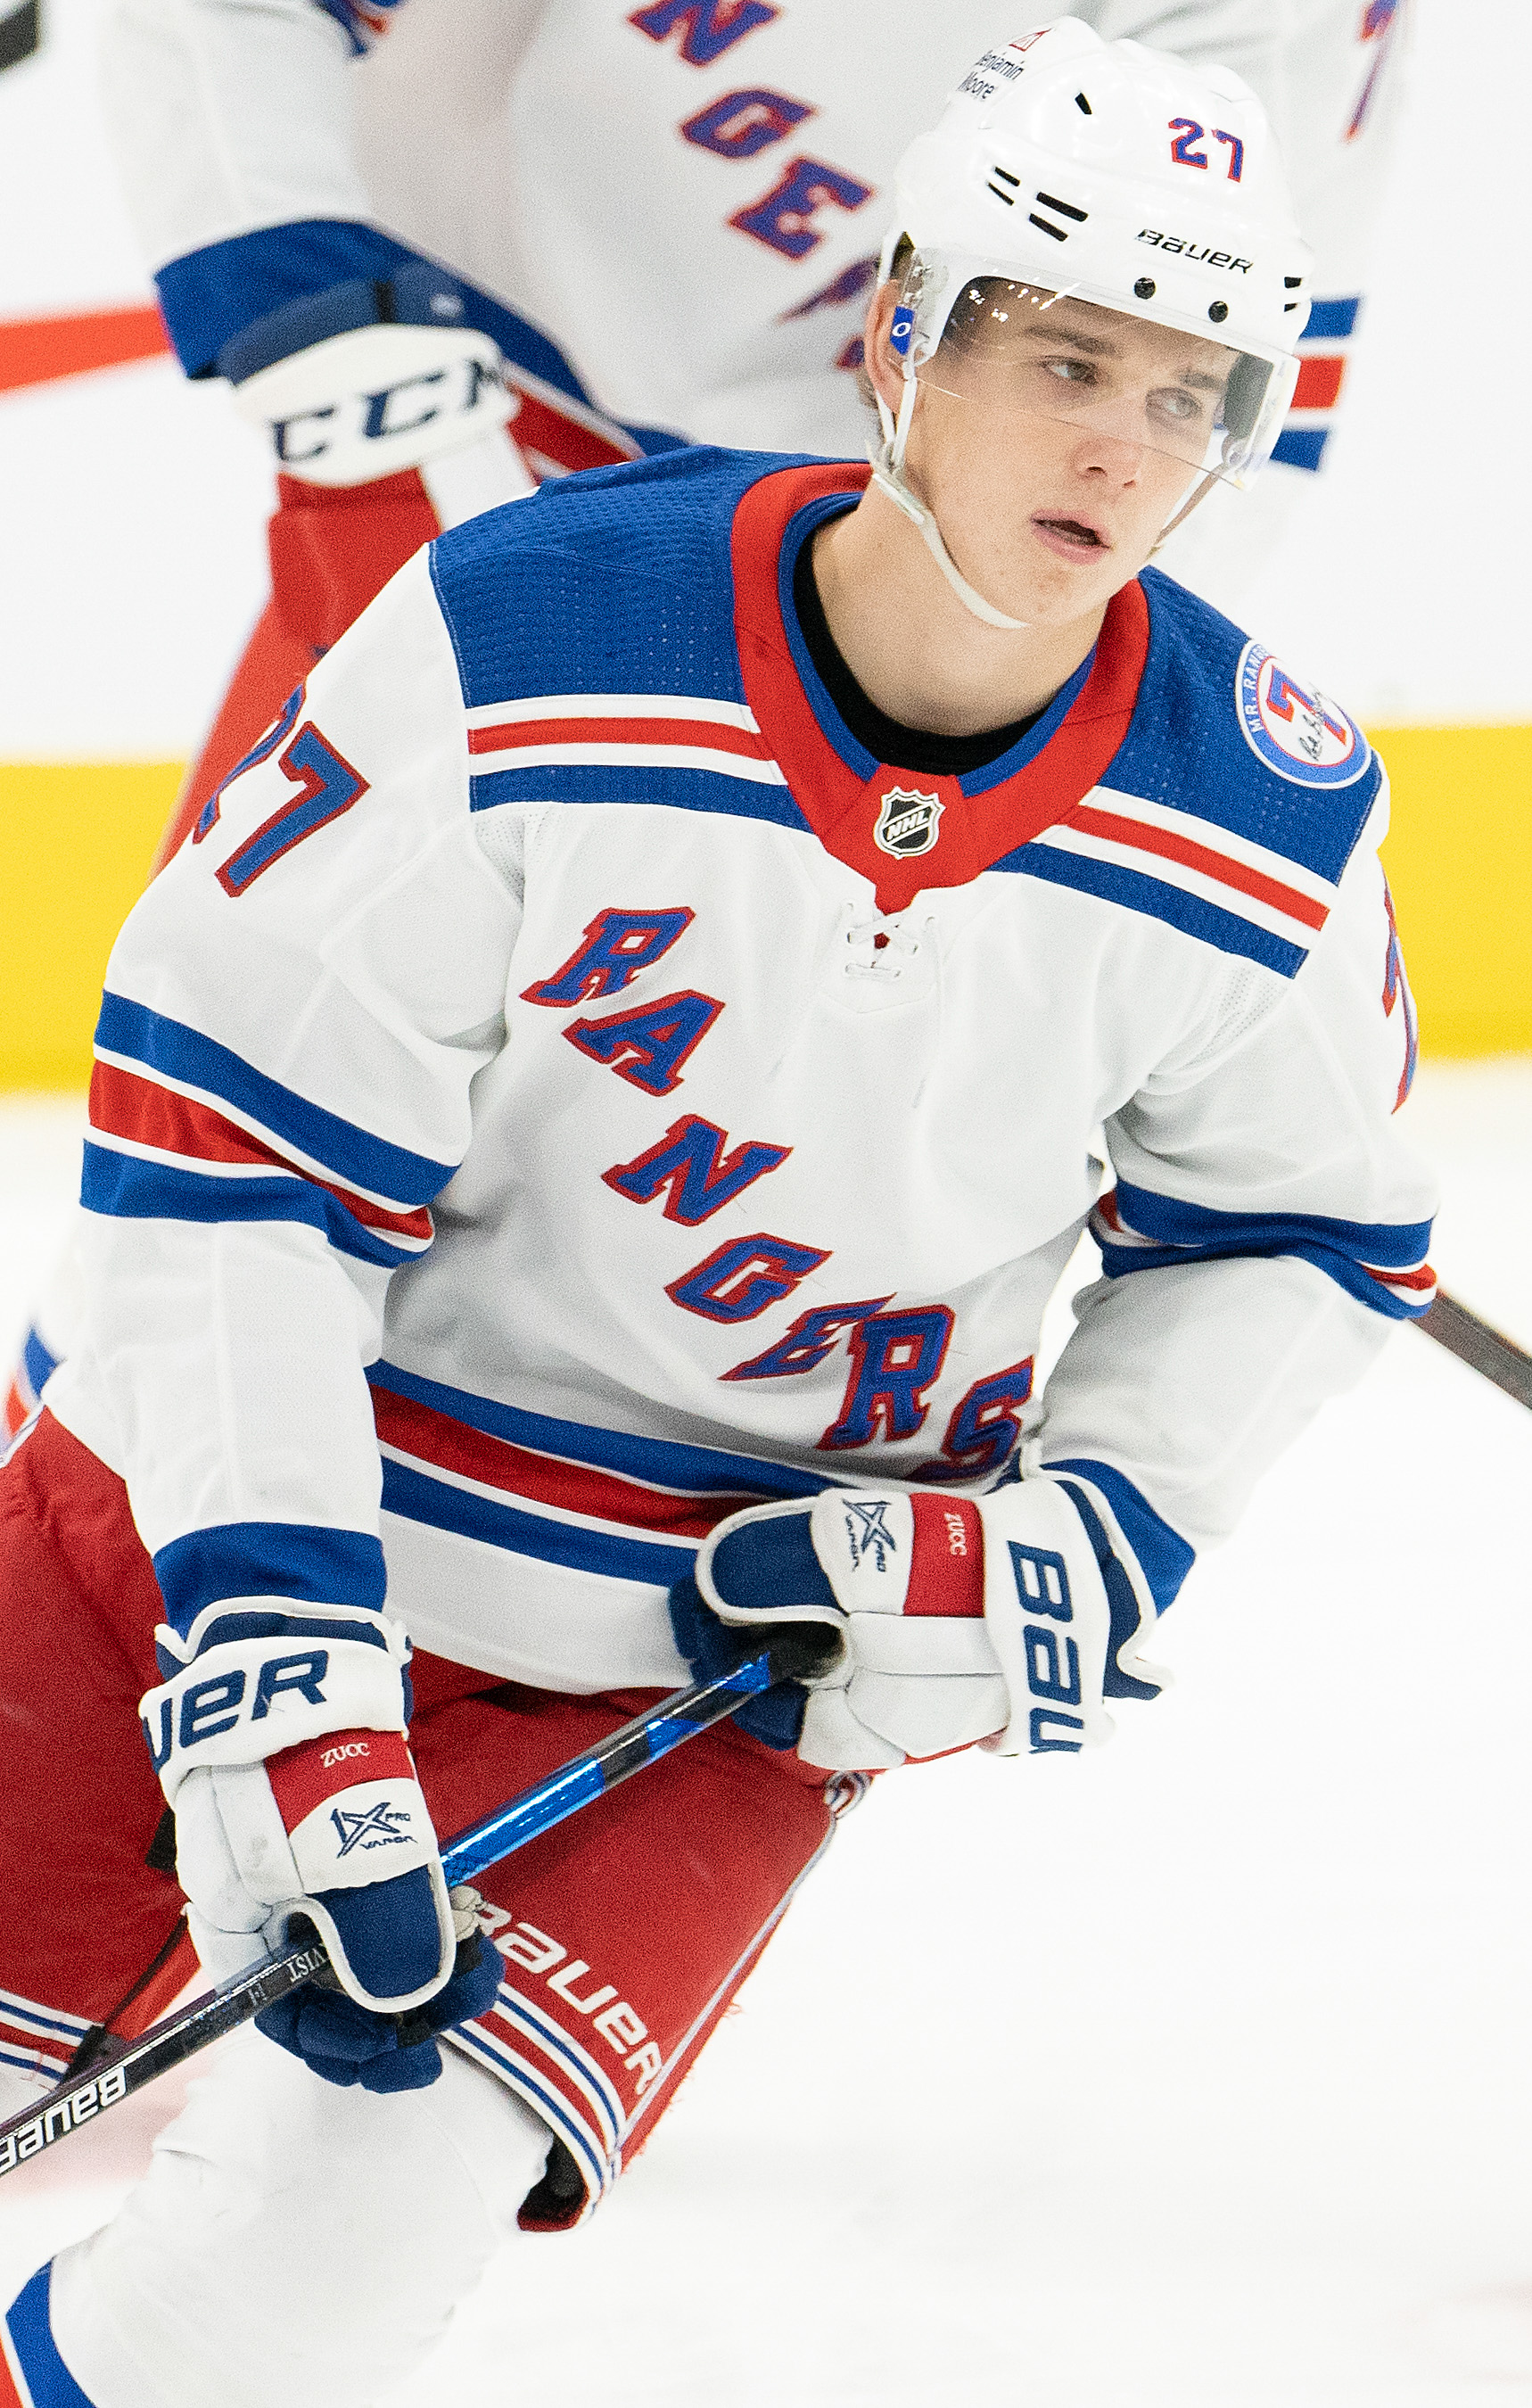 Vitali Kravtsov may have played himself out of Rangers lineup